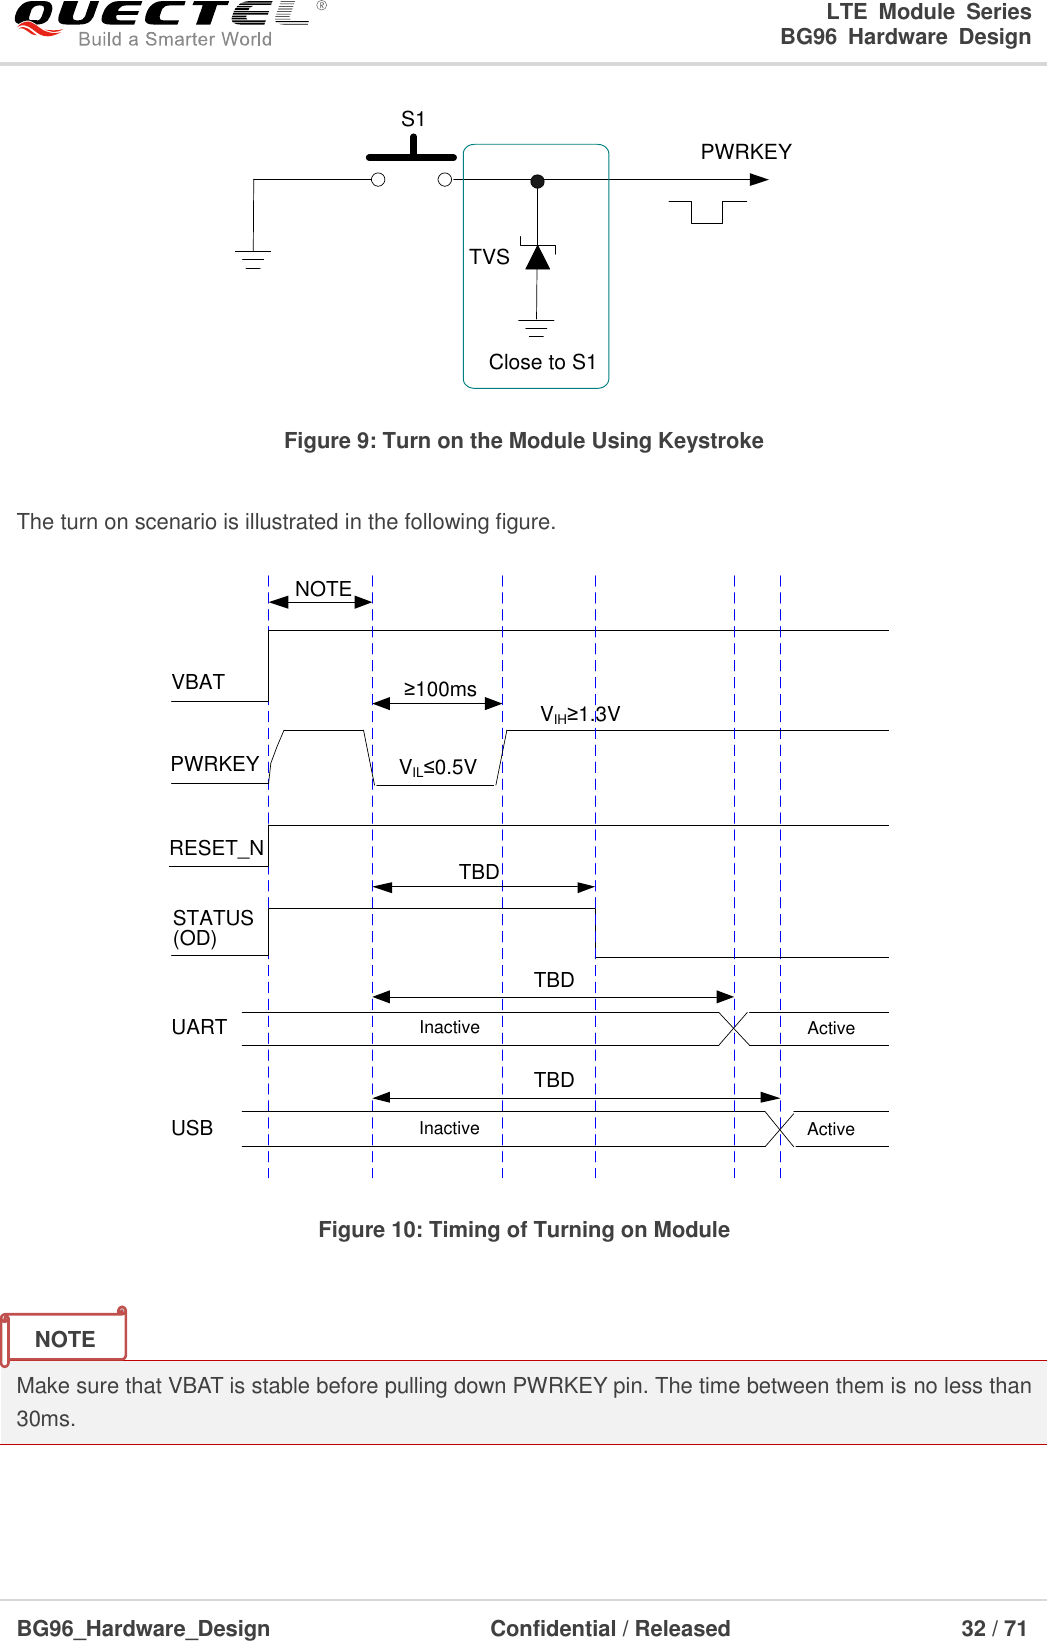 LTE  Module  Series                                                  BG96  Hardware  Design  BG96_Hardware_Design                              Confidential / Released                             32 / 71    PWRKEYS1Close to S1TVS Figure 9: Turn on the Module Using Keystroke  The turn on scenario is illustrated in the following figure. VIL≤0.5VVIH≥1.3VVBATPWRKEY≥100msRESET_NSTATUS(OD)Inactive ActiveUARTNOTEInactive ActiveUSBTBDTBDTBD Figure 10: Timing of Turning on Module   Make sure that VBAT is stable before pulling down PWRKEY pin. The time between them is no less than 30ms.  NOTE 